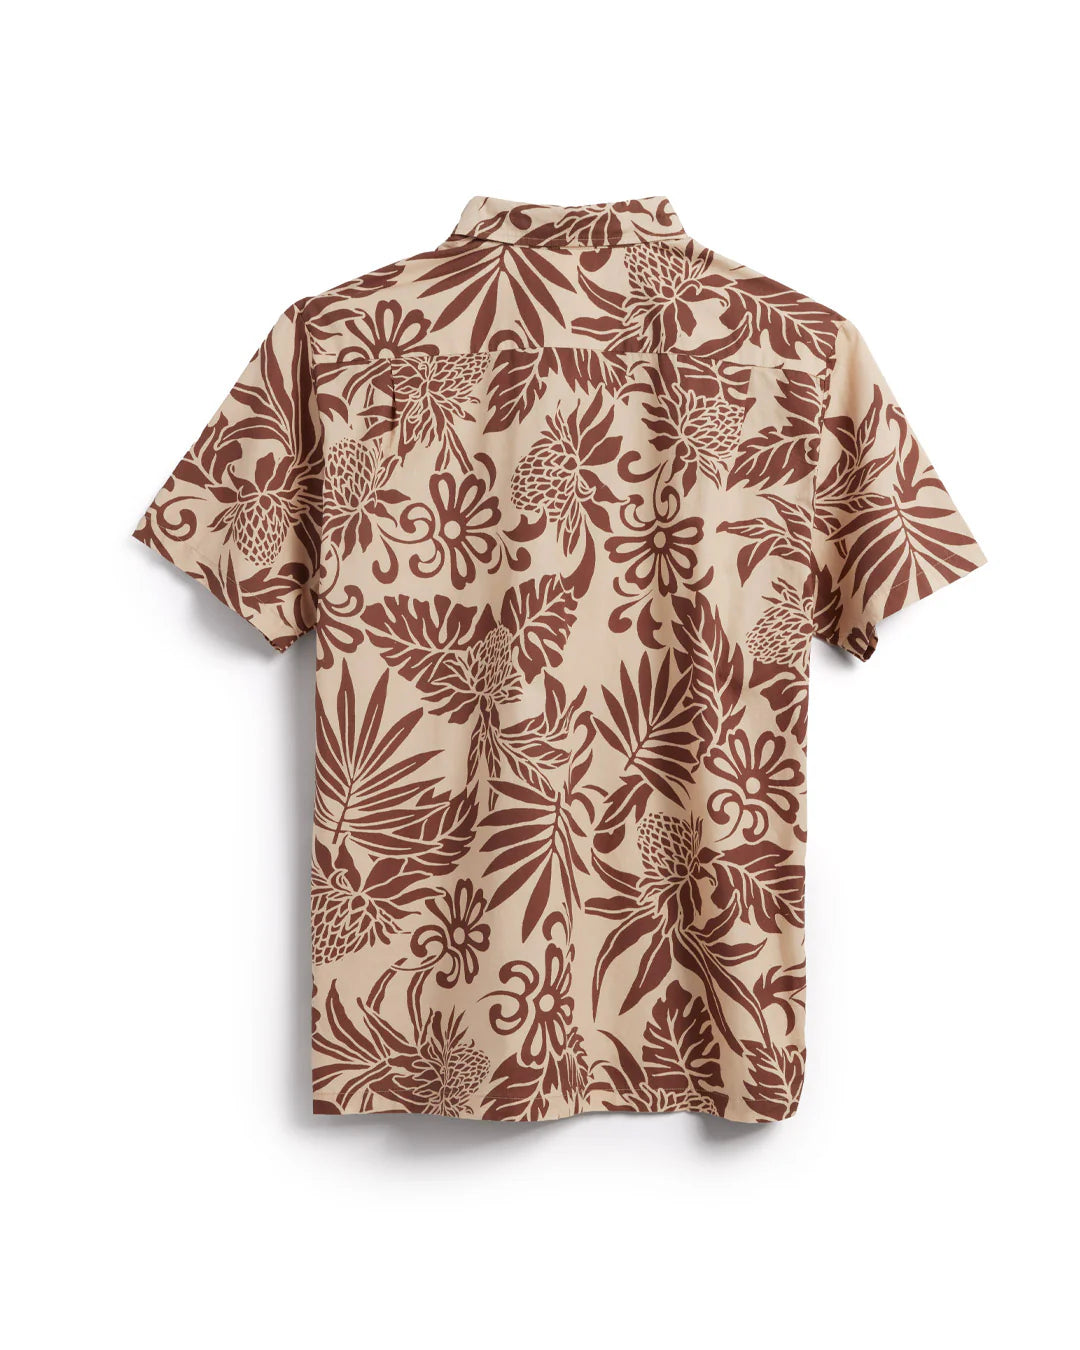 Back view of the Brown Lanai Shirt by Birdwell